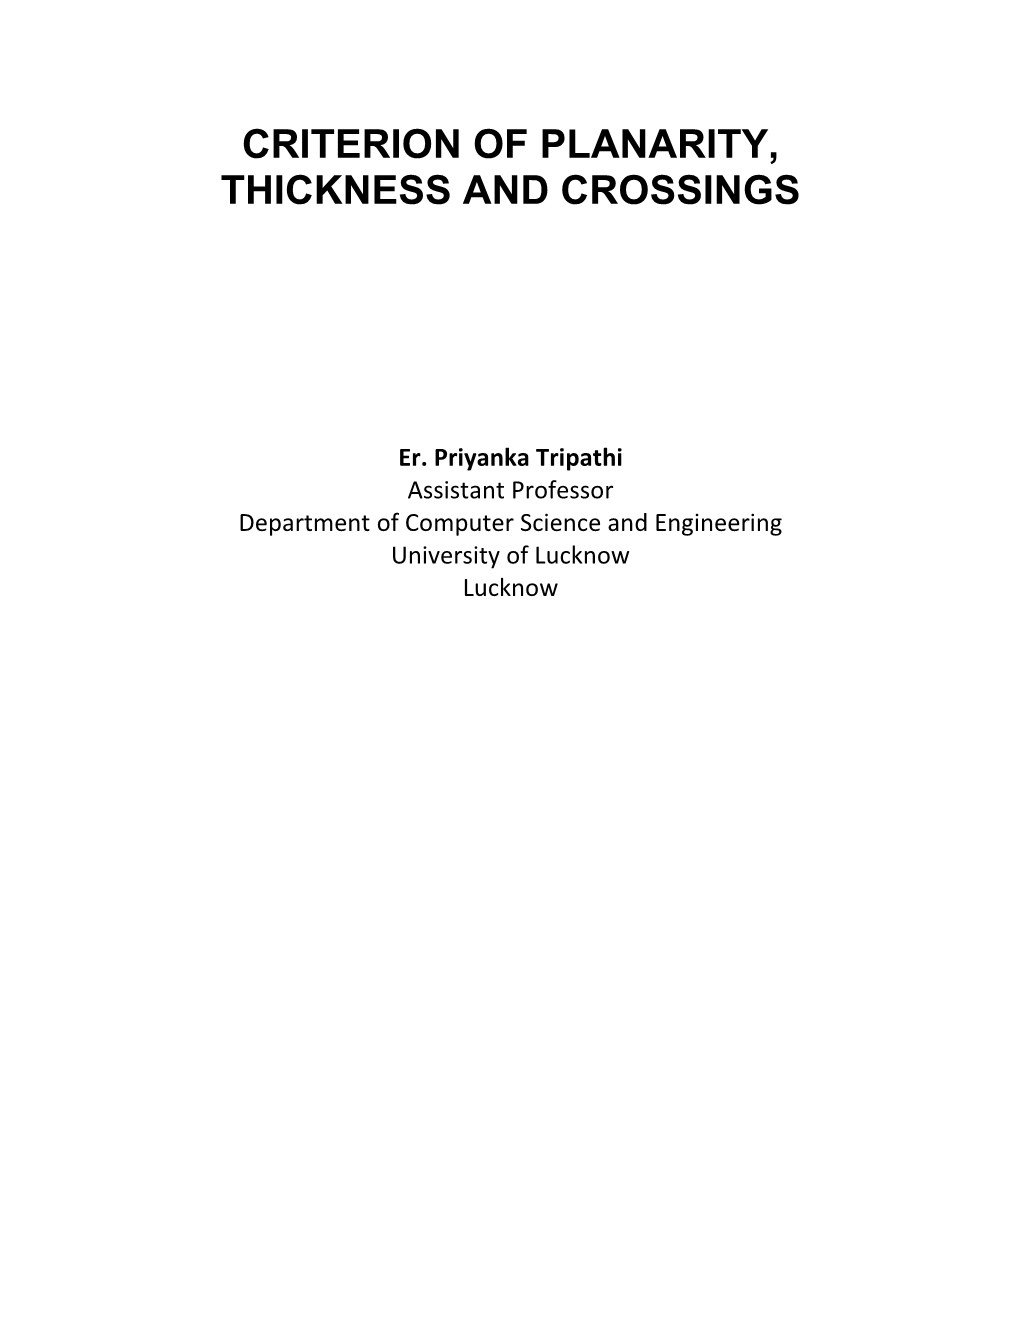 Criterion of Planarity, Thickness and Crossings